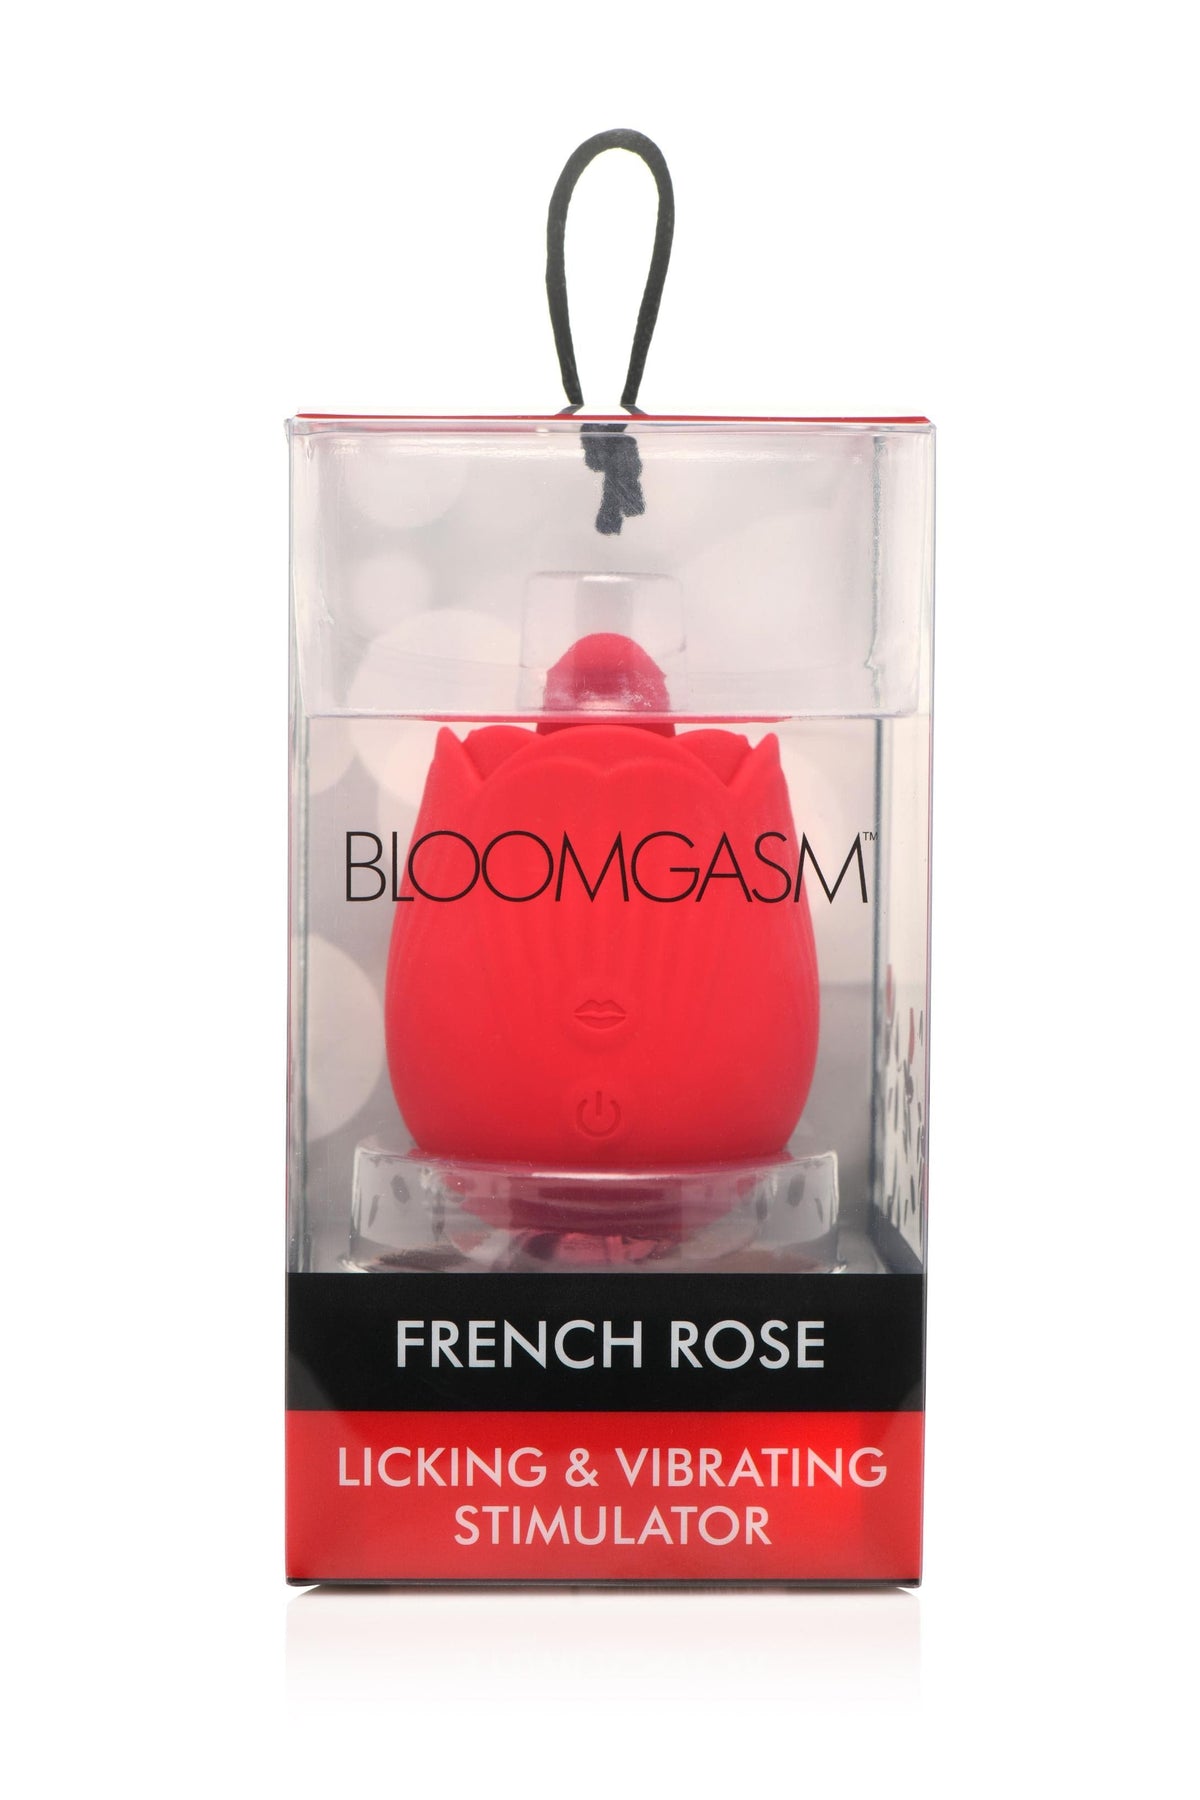 bloomgasm french rose licking and vibrating stimulator red